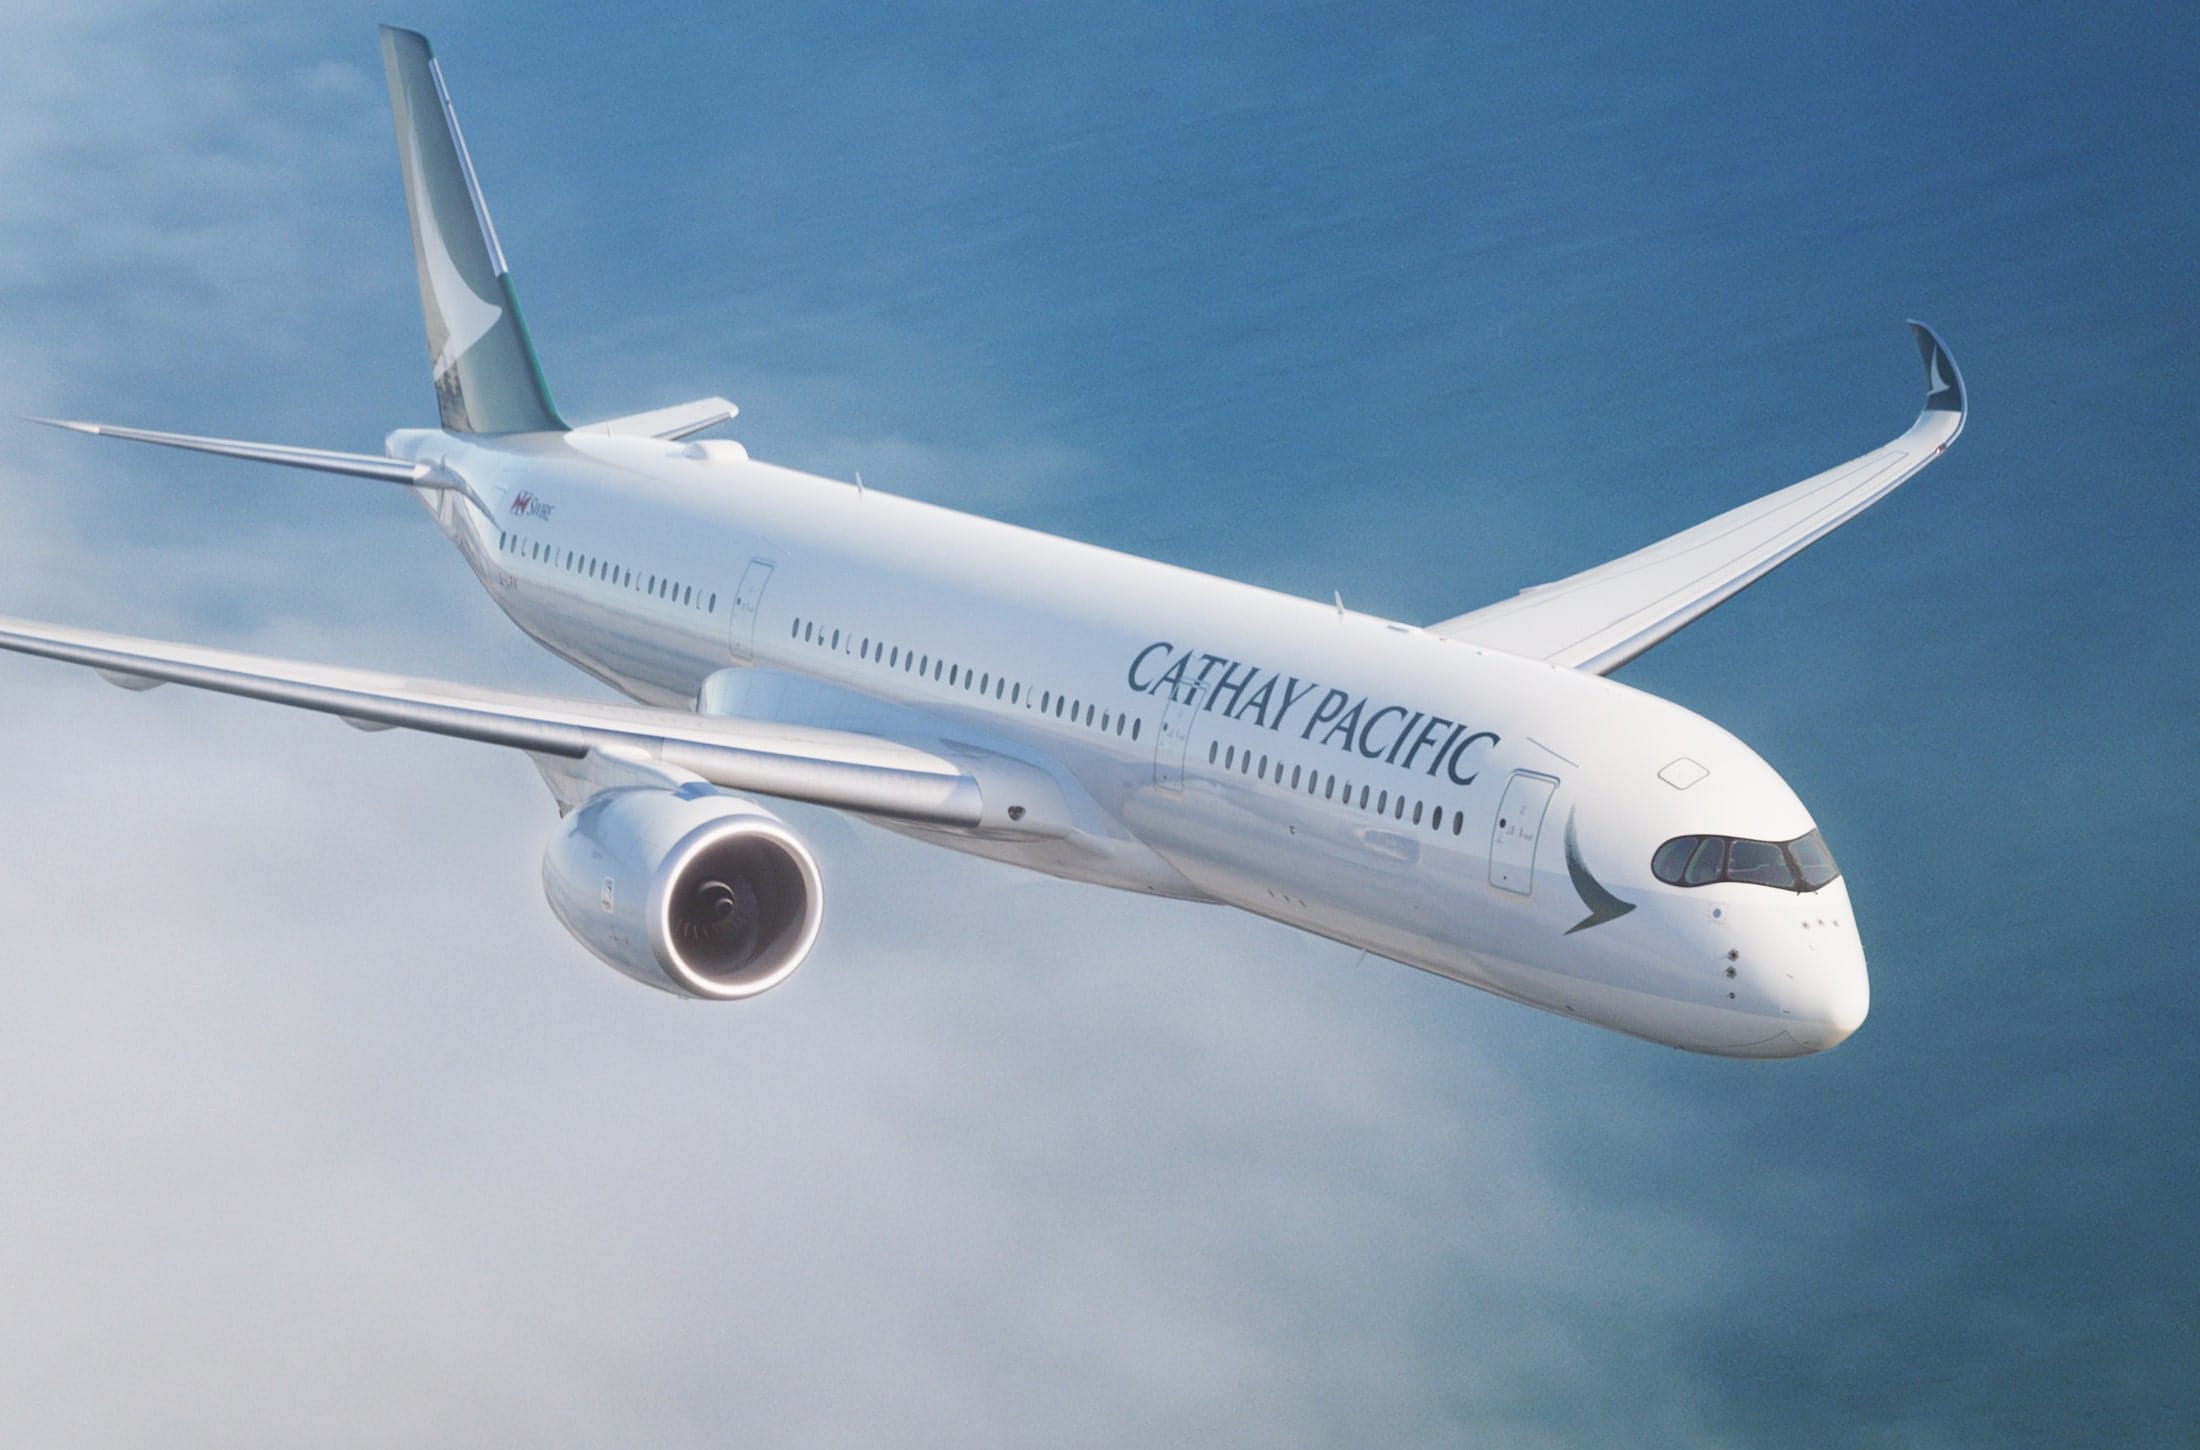 UOBCathay Pacific promotion receive up to 6,000 bonus Asia Miles